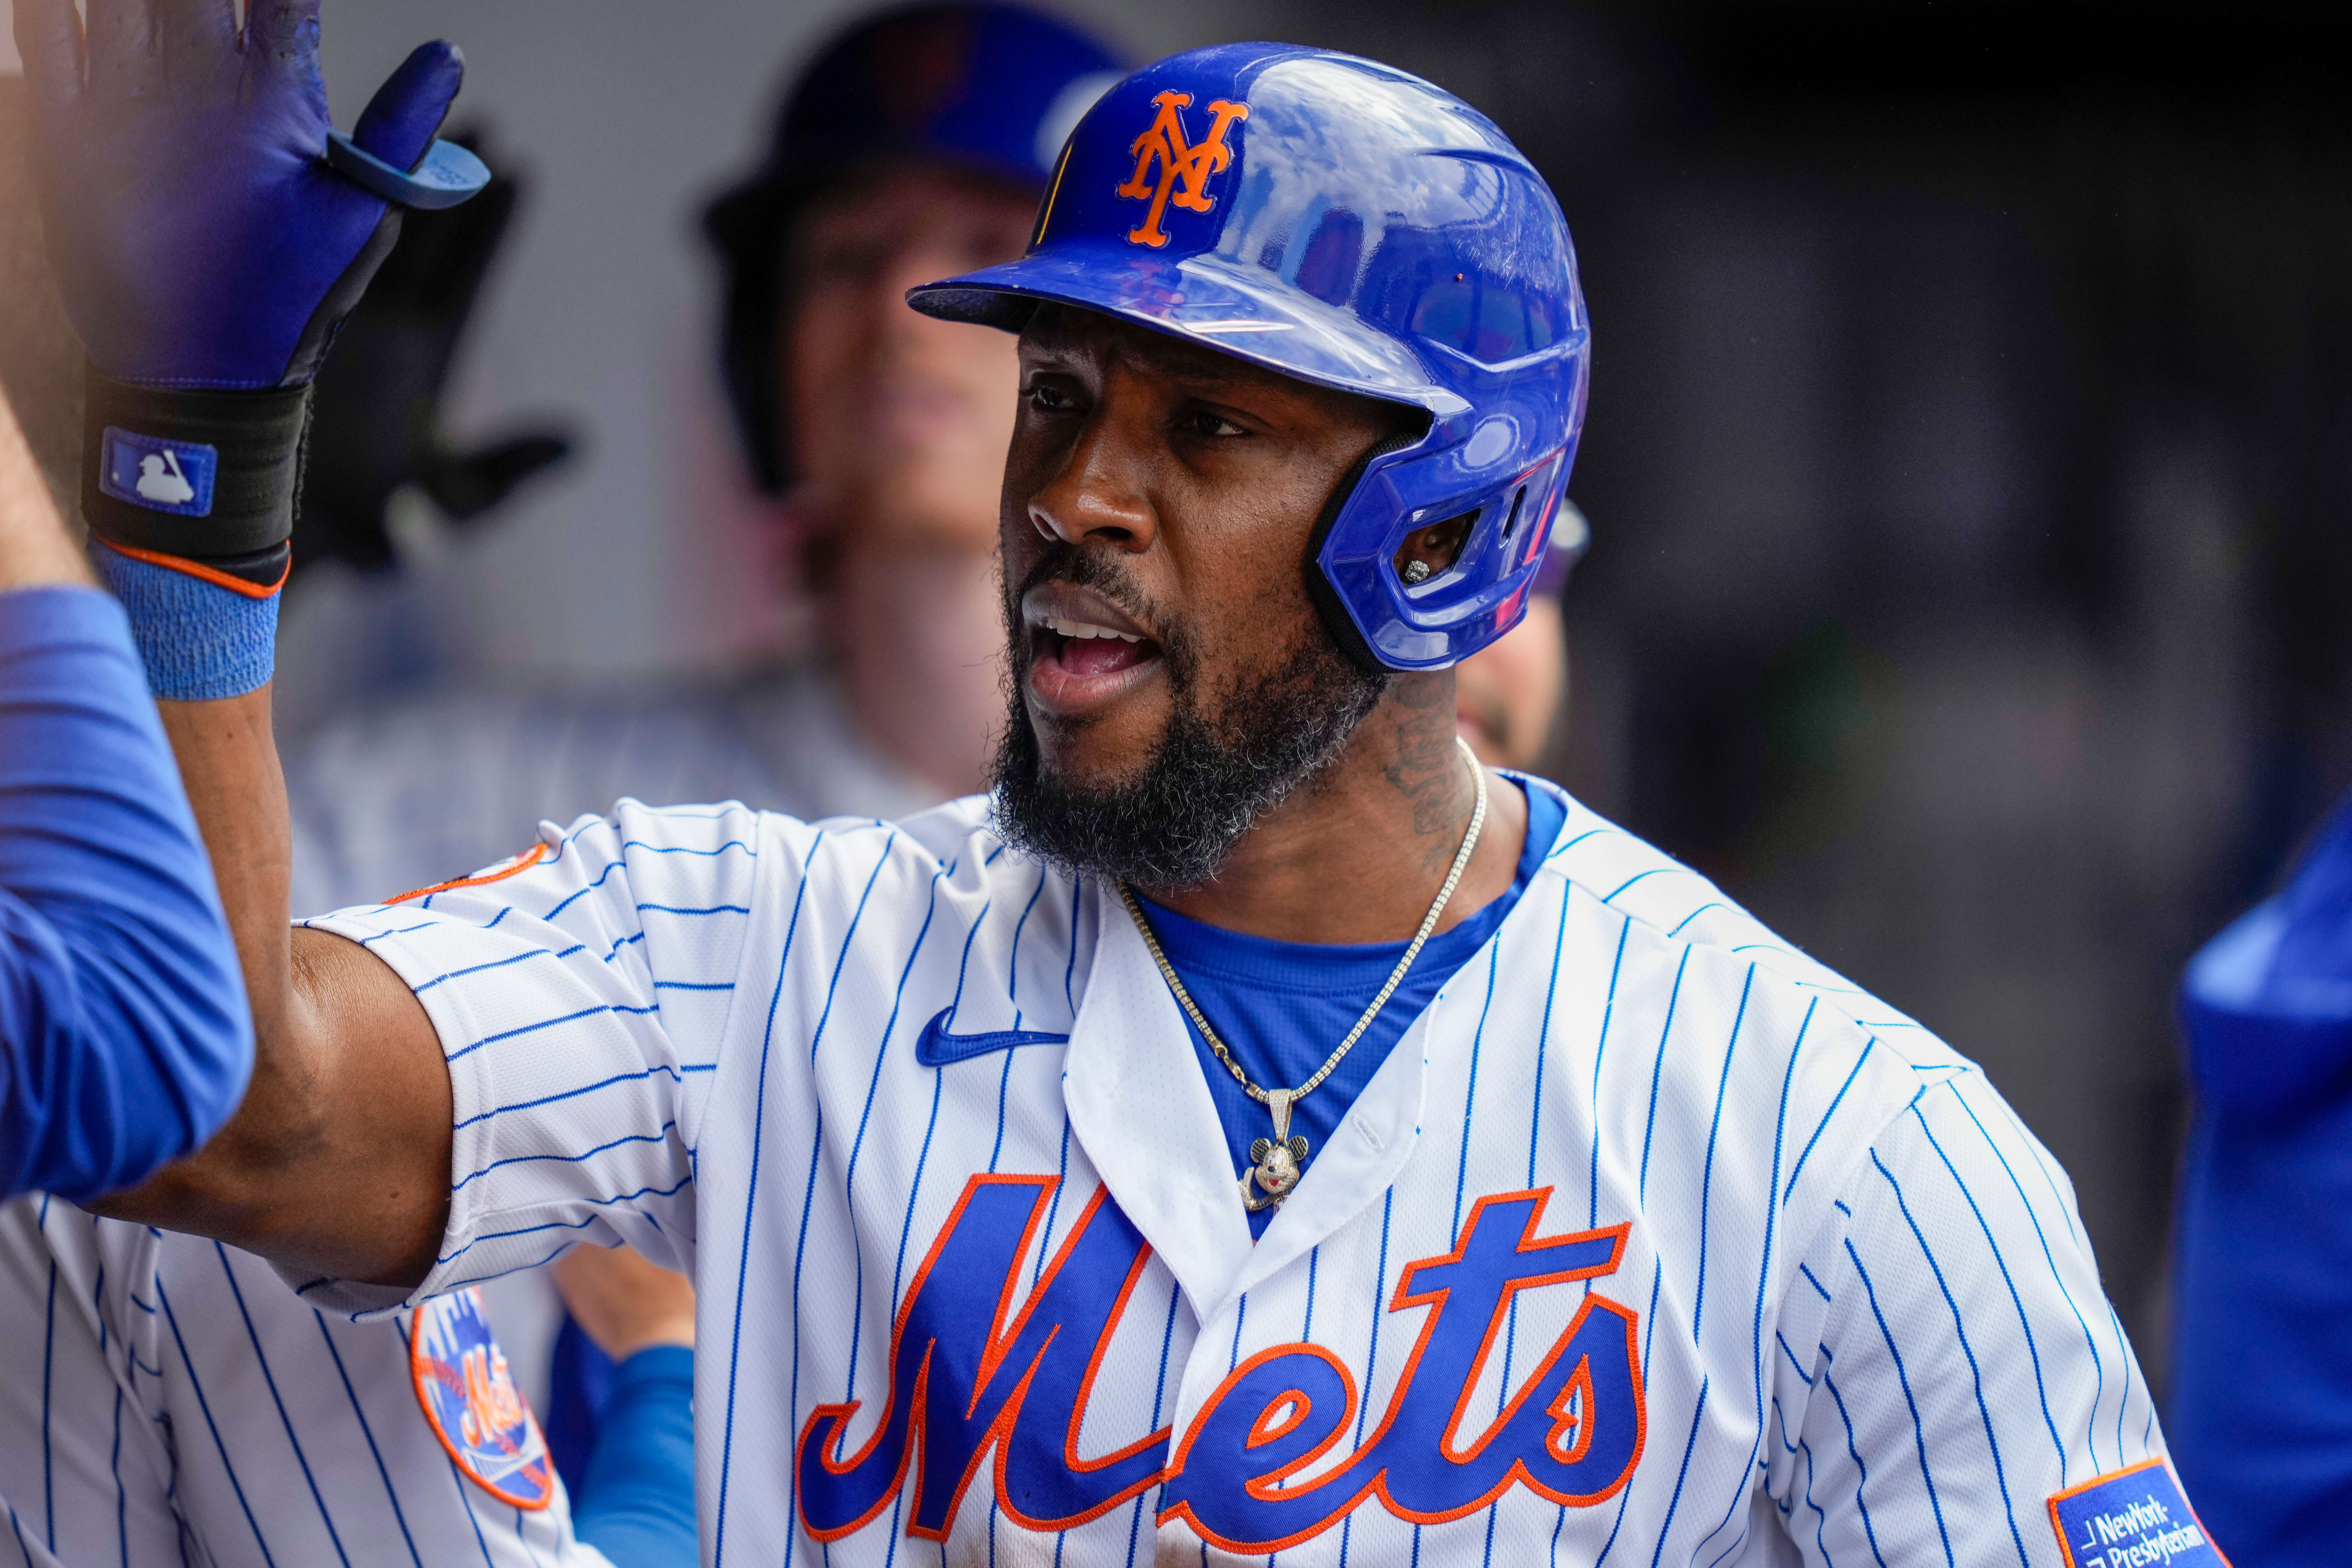 Starling Marte 'starting to feel good' as Mets vet rounds into